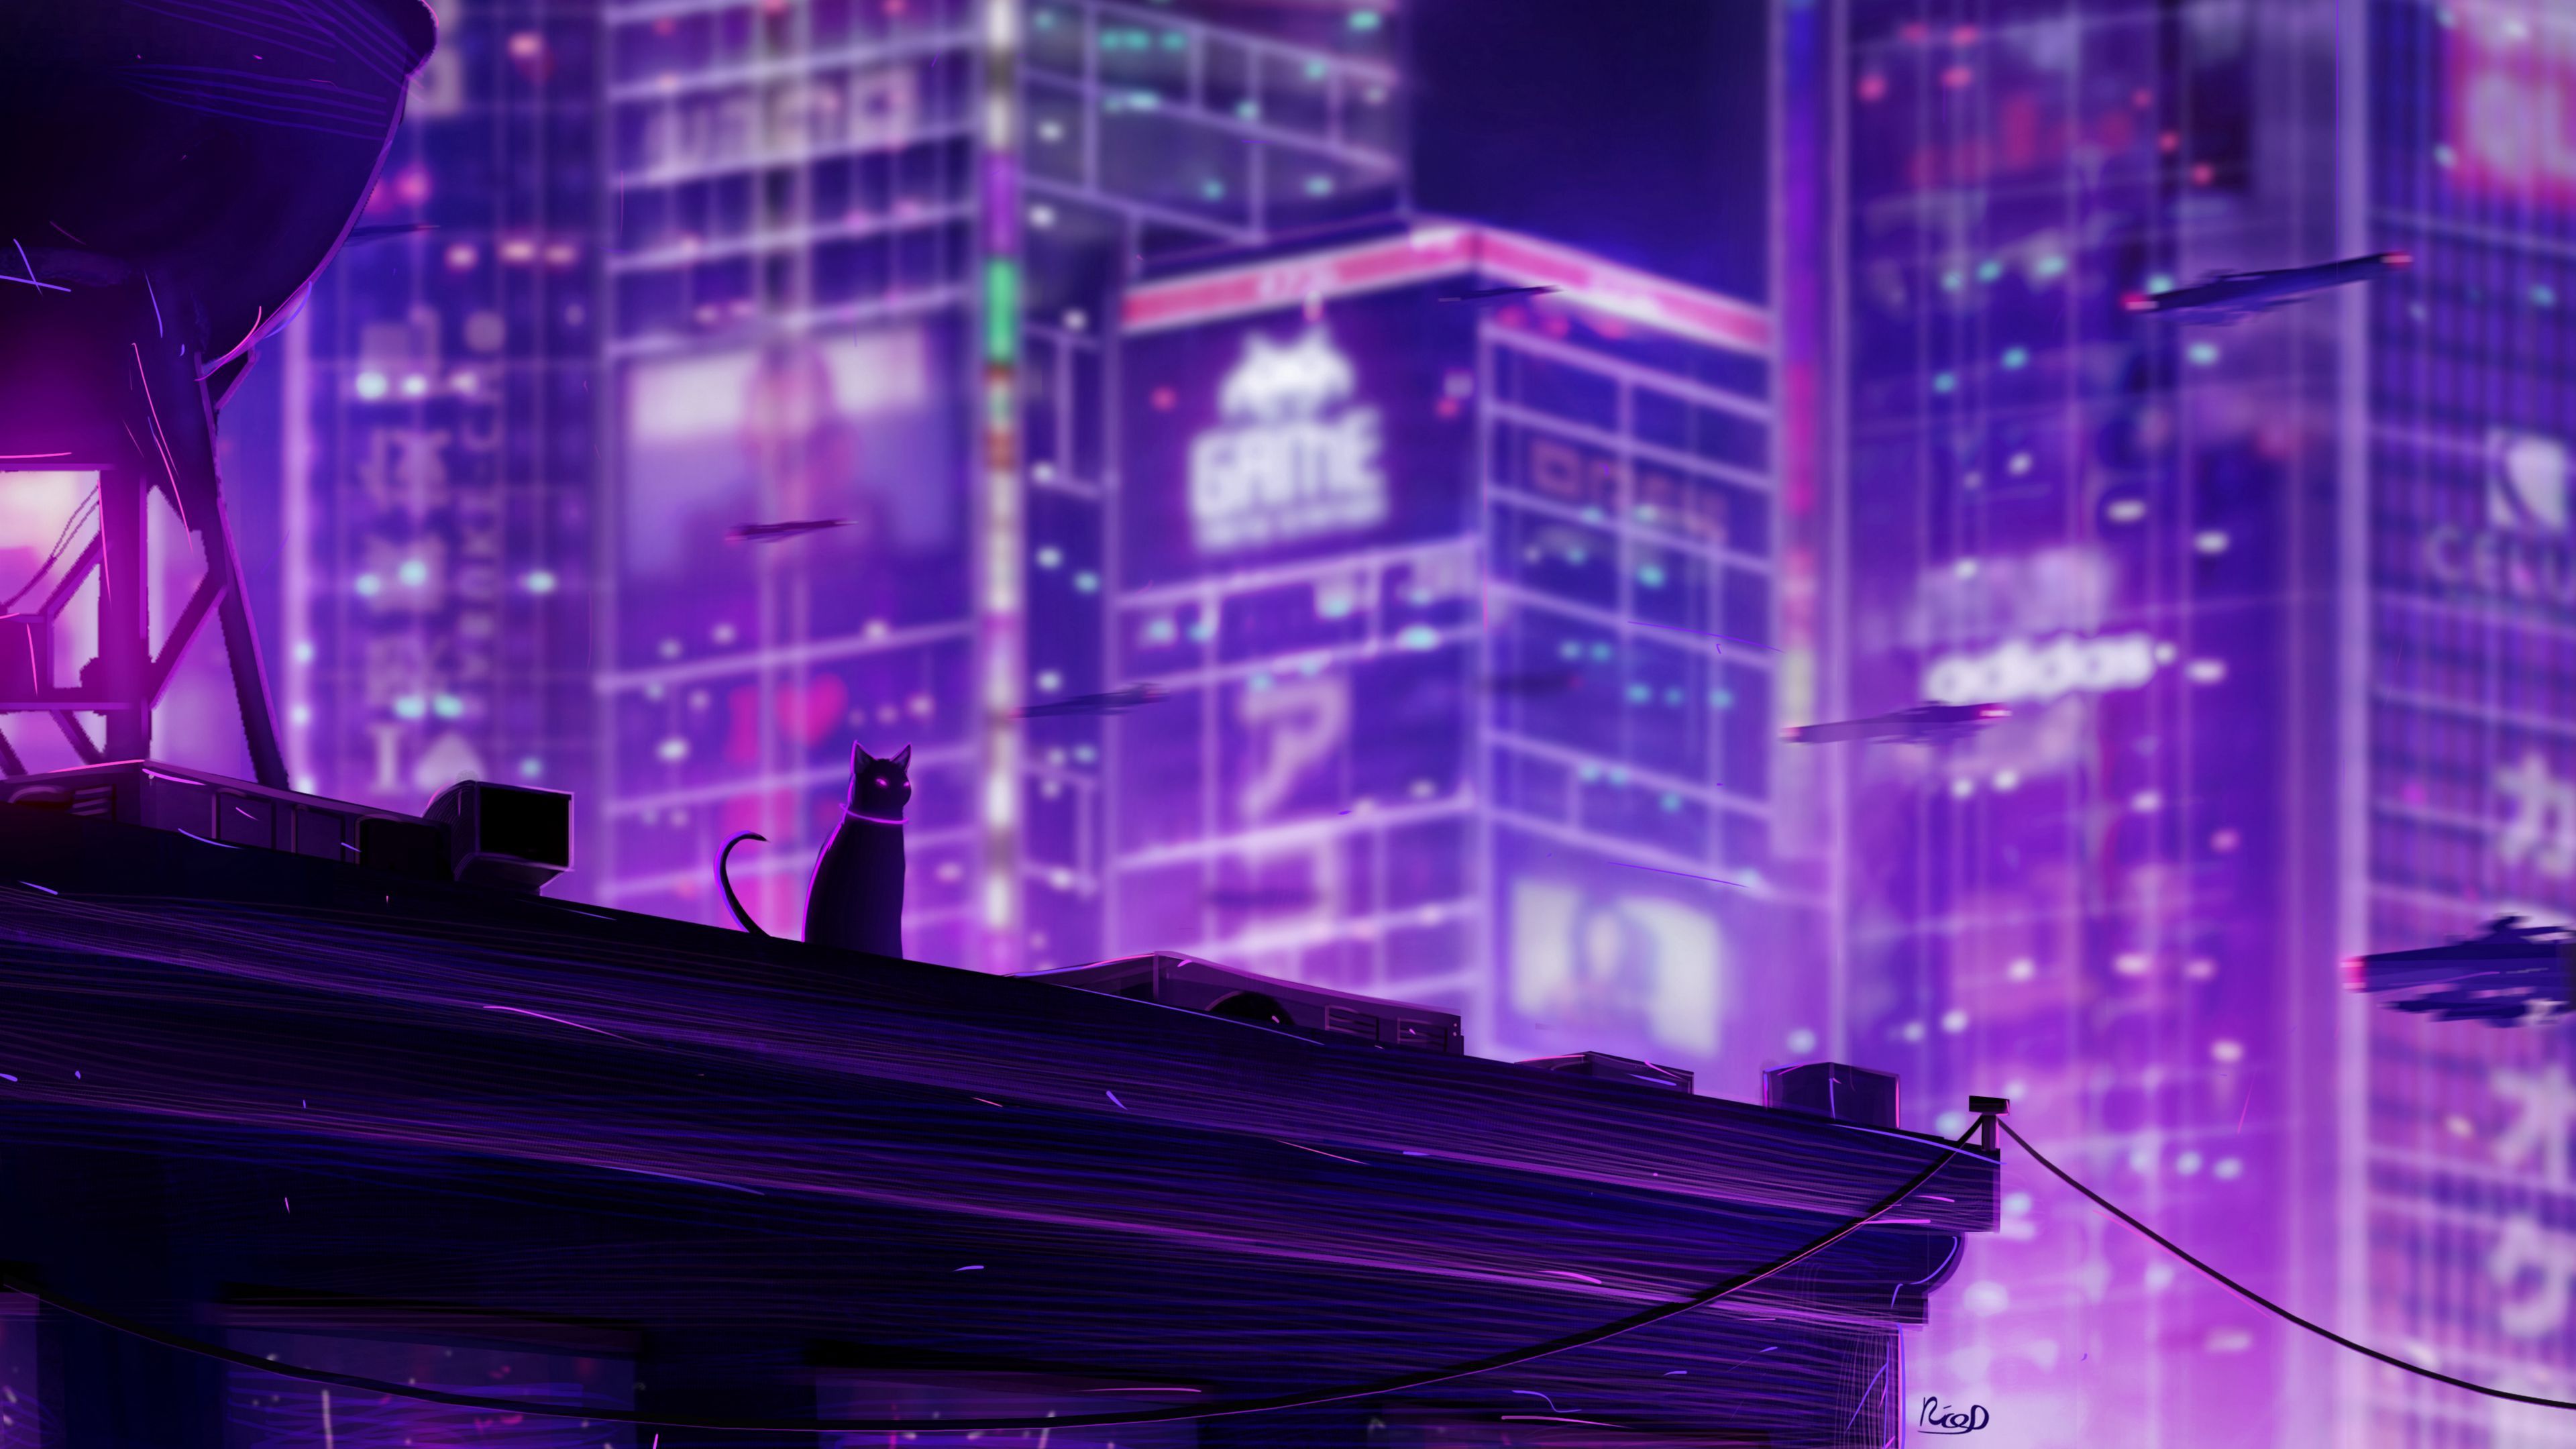 Download wallpaper 3840x2160 cat, roof, city, future, neon, backlight 4k uhd 16:9 HD background